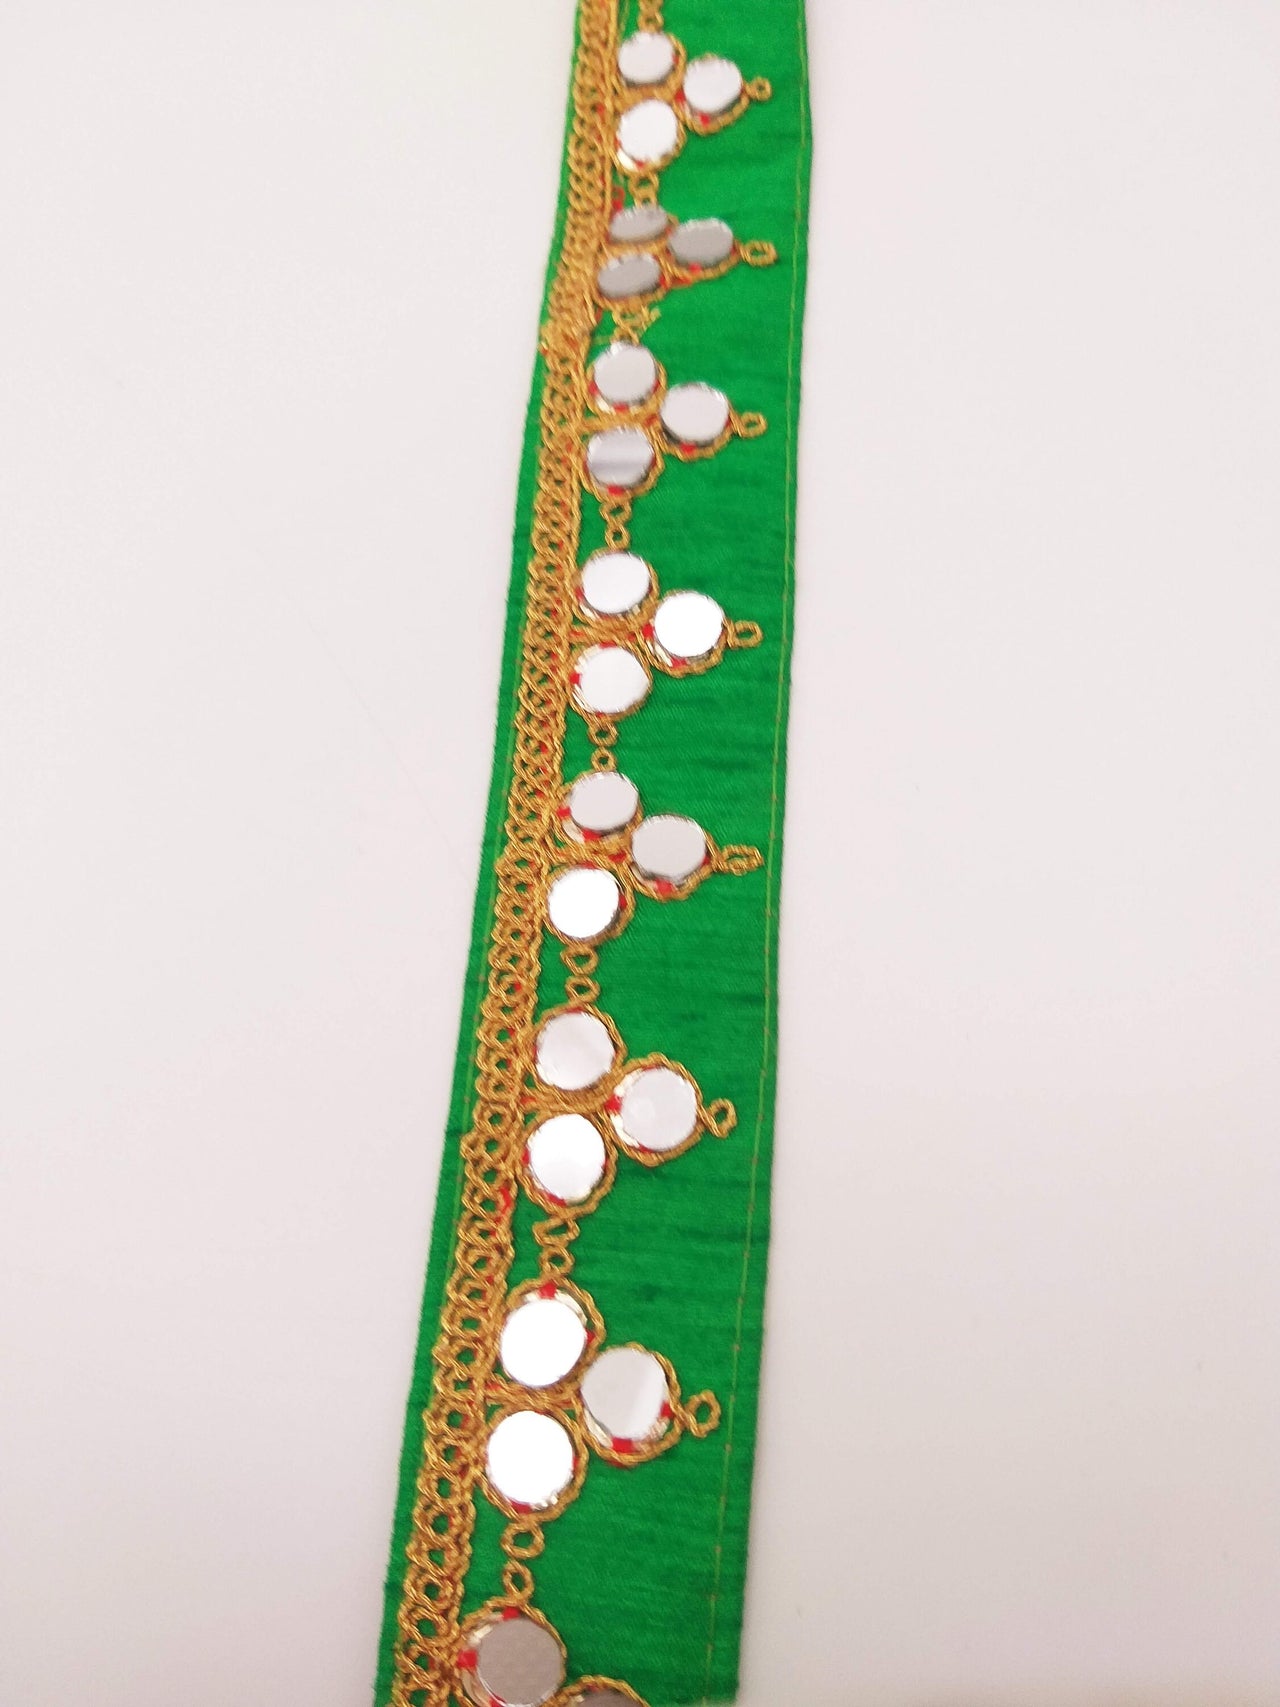 Green Silk Trim With Mirrors Embellishments and Gold Embroidery, Approx. 34mm Wide, Decorative Trim Costume Trim Fashion Trim By Yard